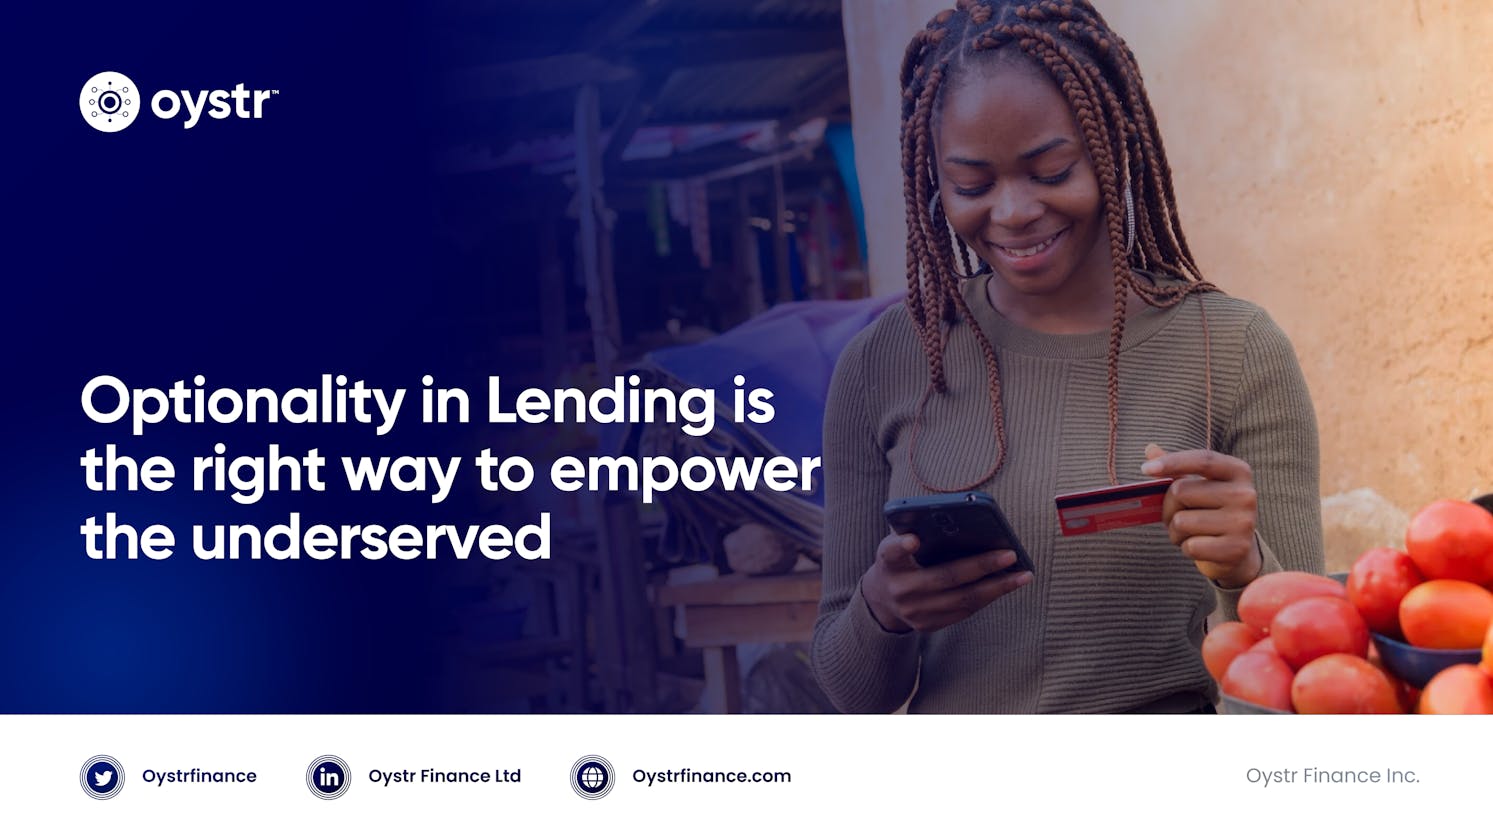 Optionality in Lending is the right way to empower the underserved